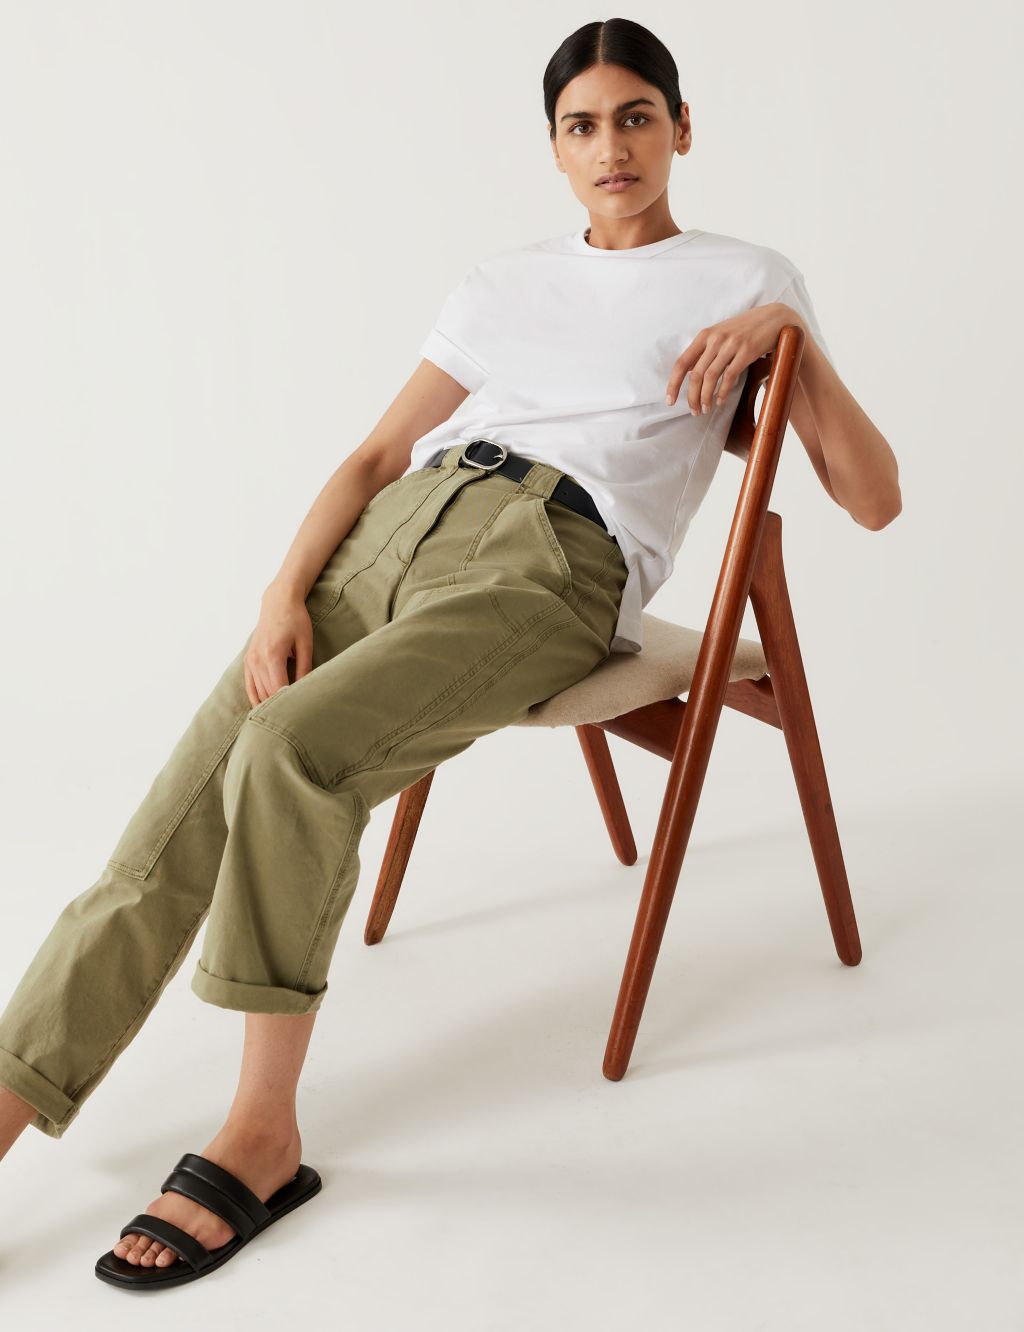 Cotton Rich Relaxed Straight Trousers image 2